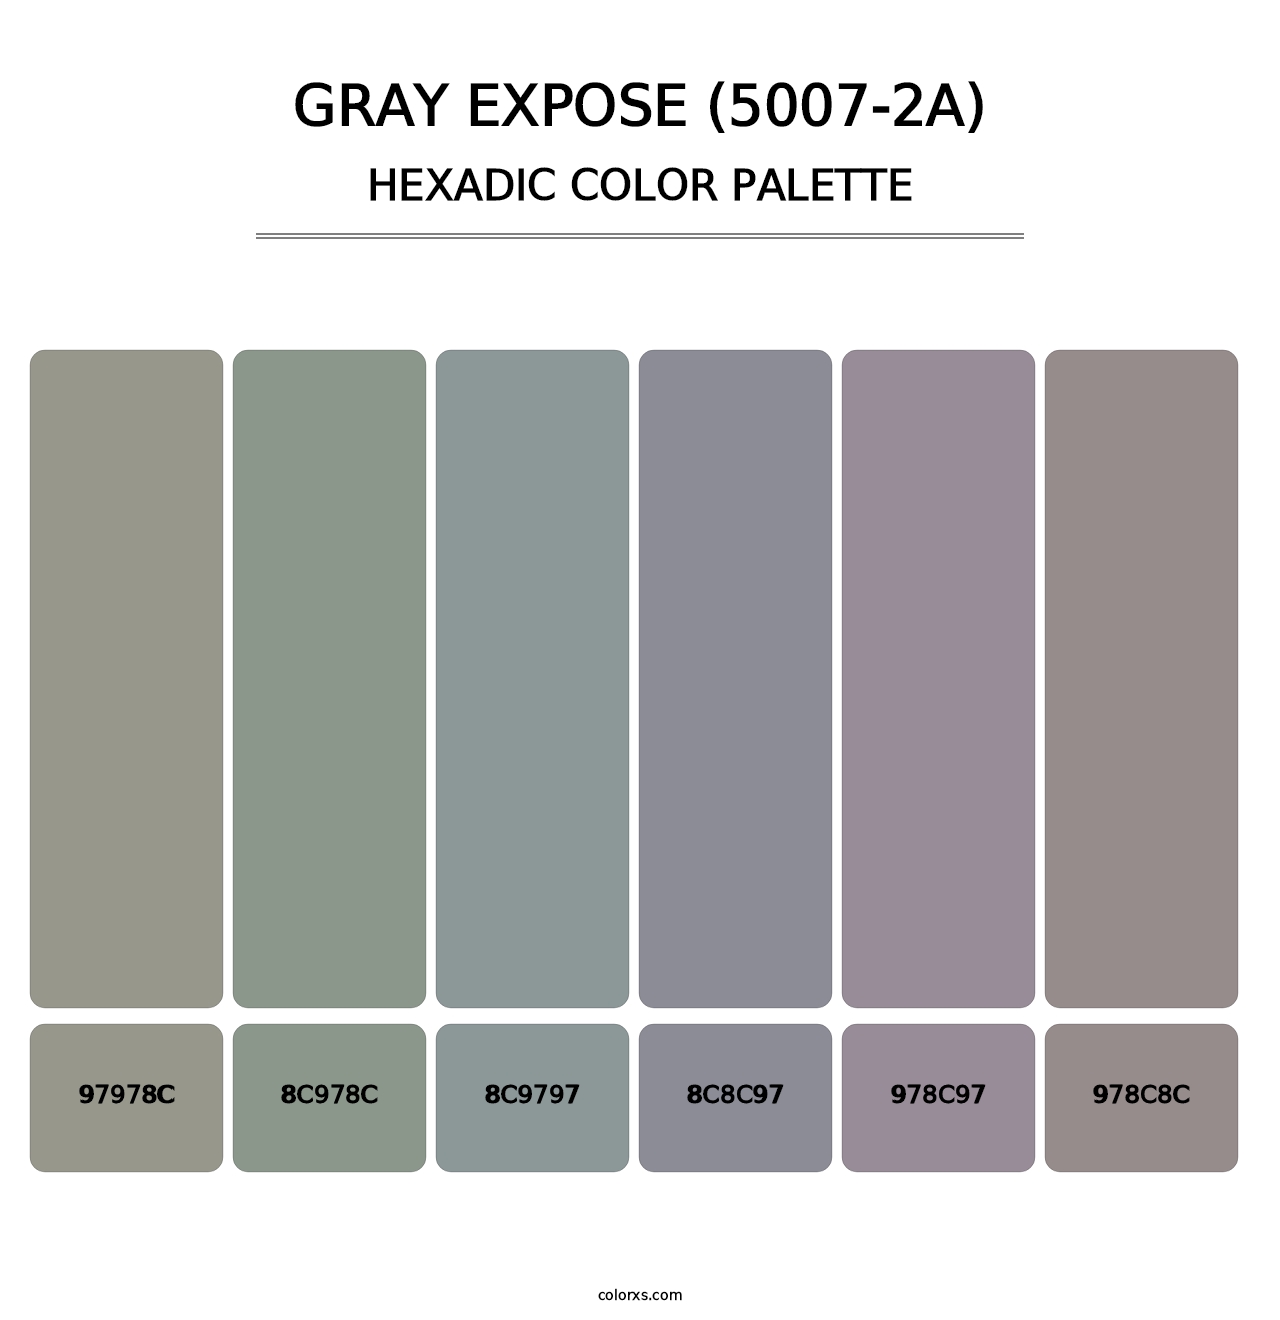 Gray Expose (5007-2A) - Hexadic Color Palette